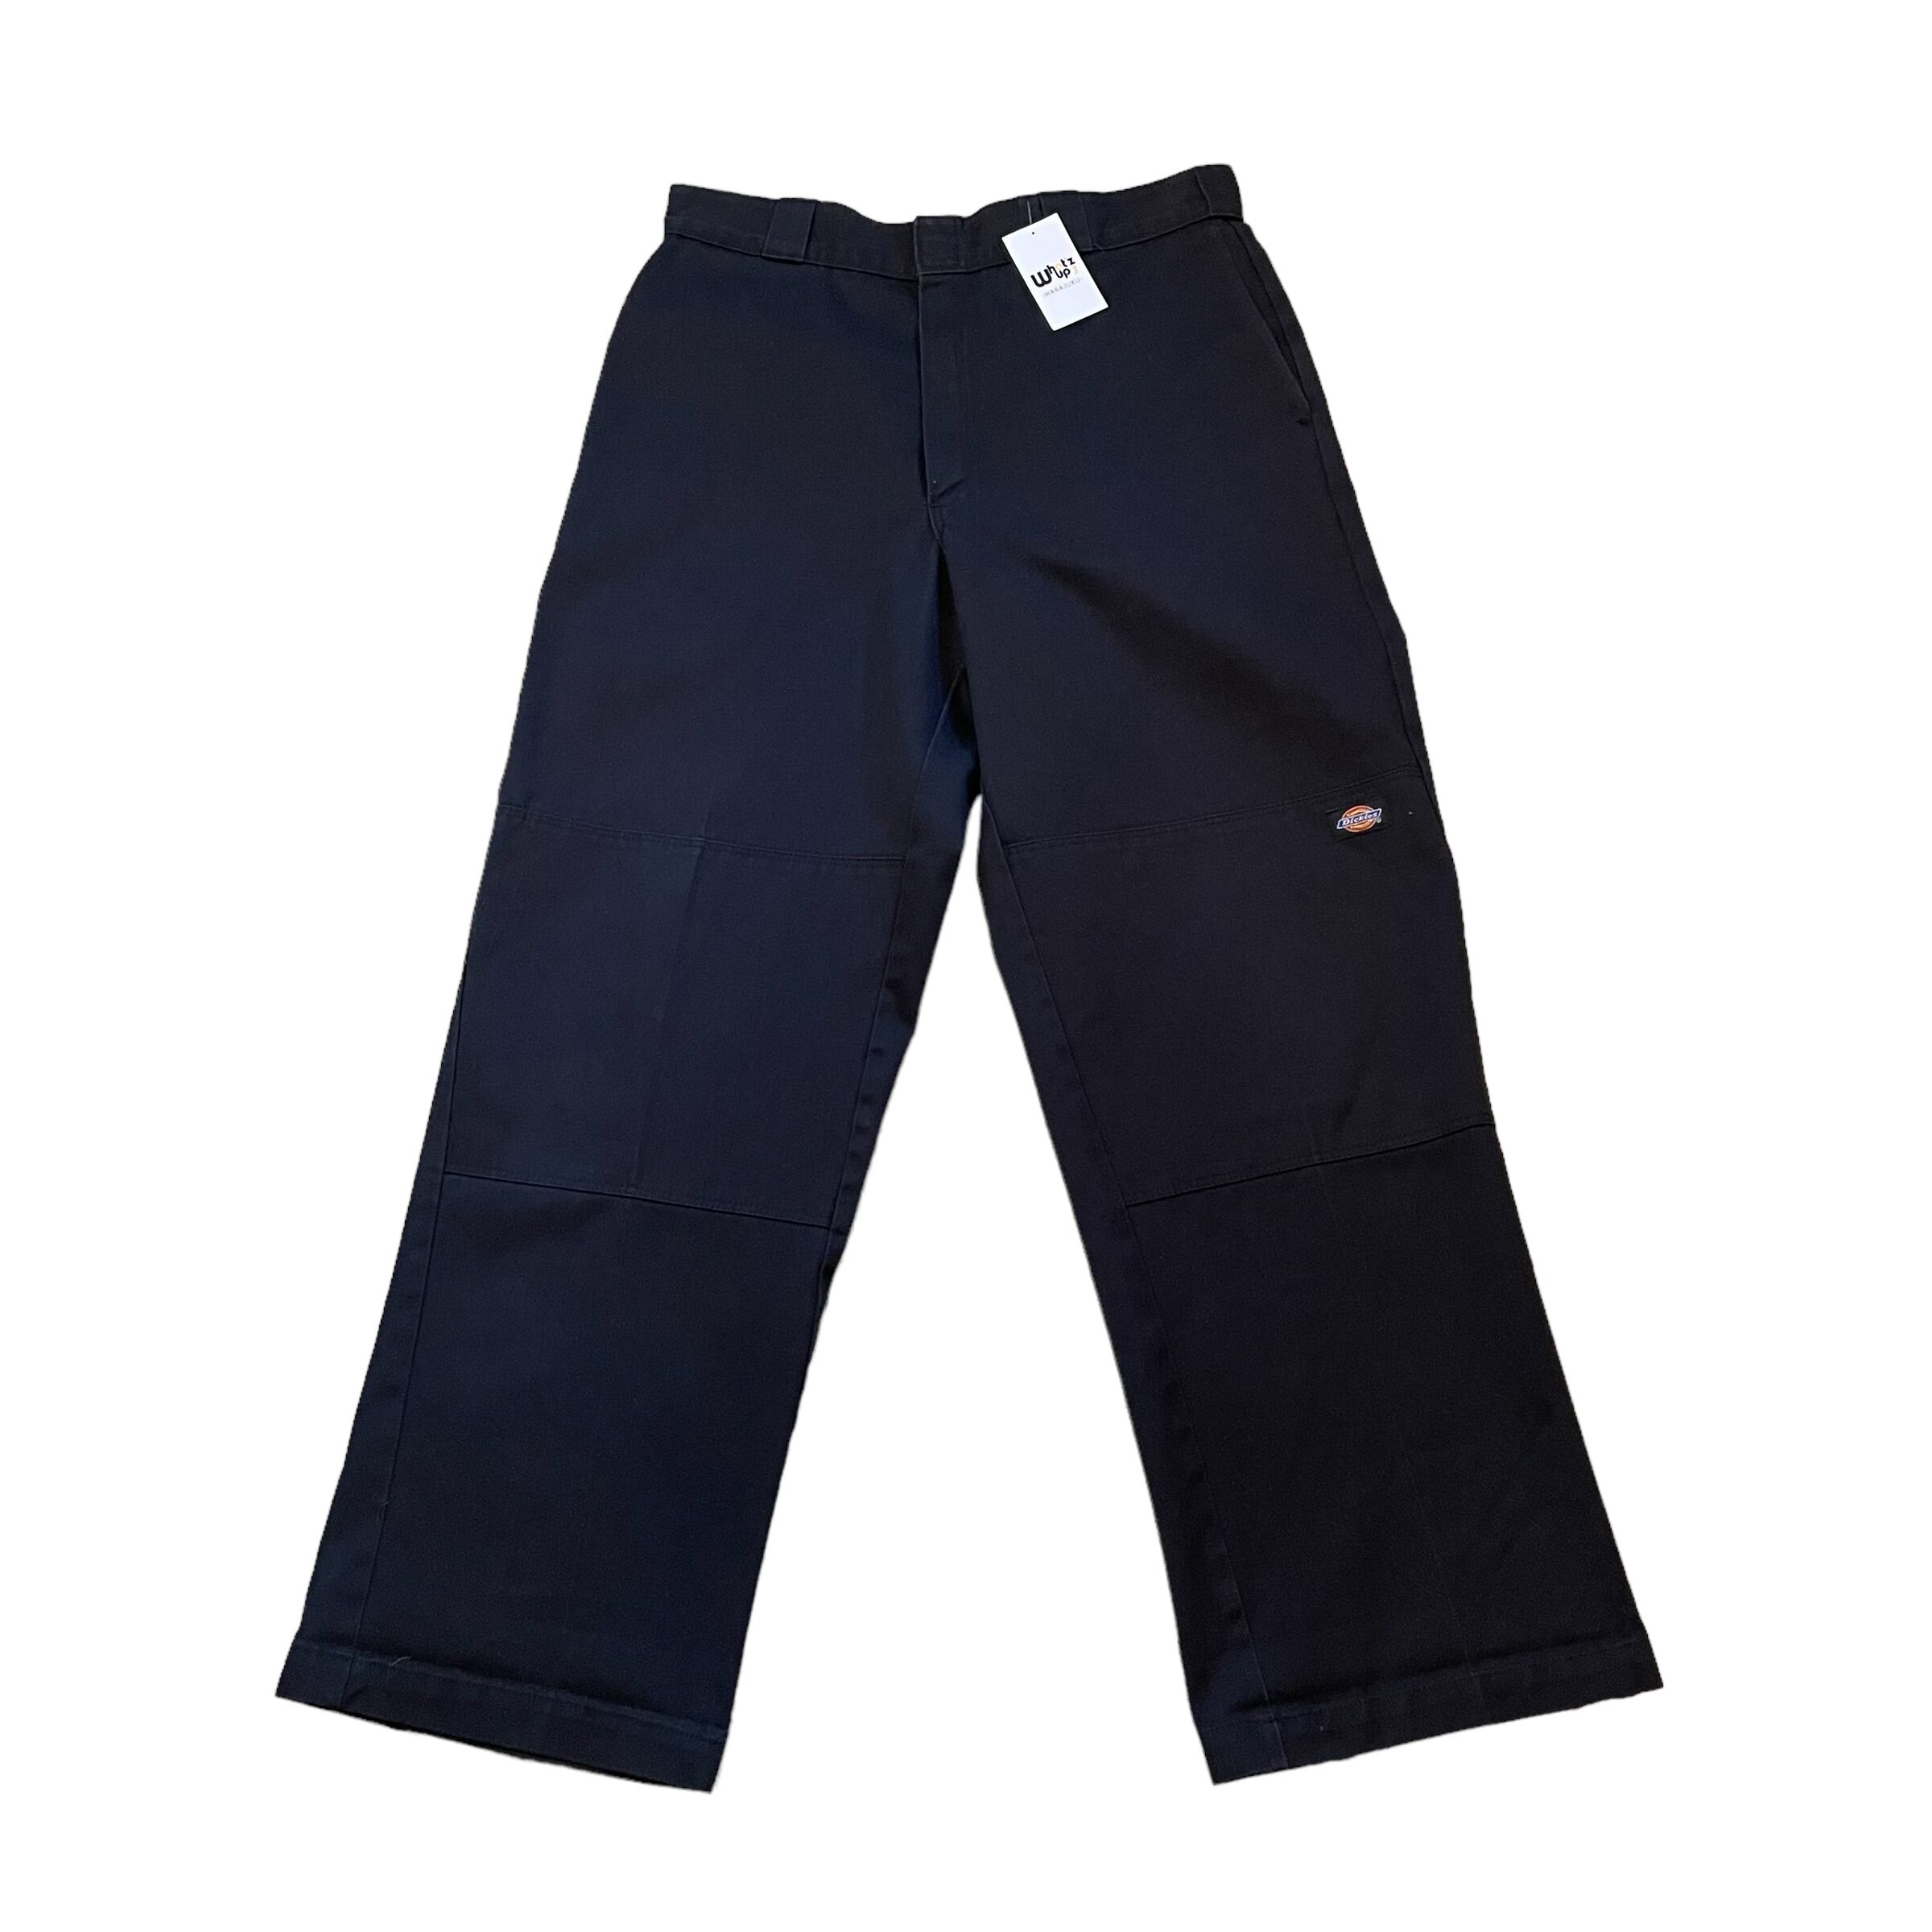 00s Dickies double knee work pants | What’z up powered by BASE